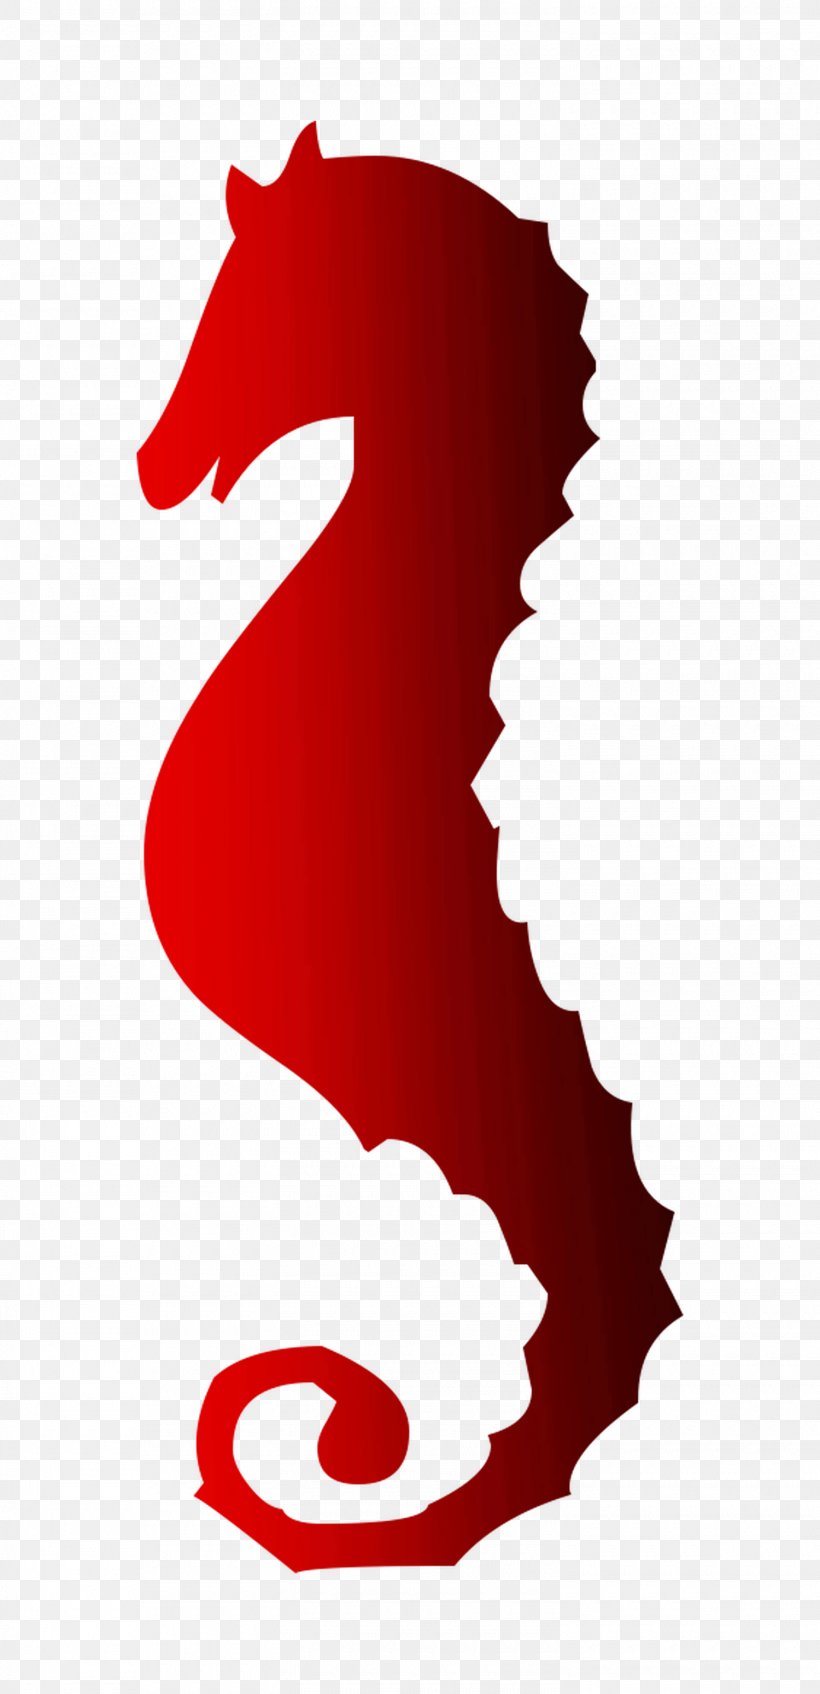 Seahorse Clip Art Logo RED.M, PNG, 1500x3100px, Seahorse, Logo, Red, Redm, Syngnathiformes Download Free